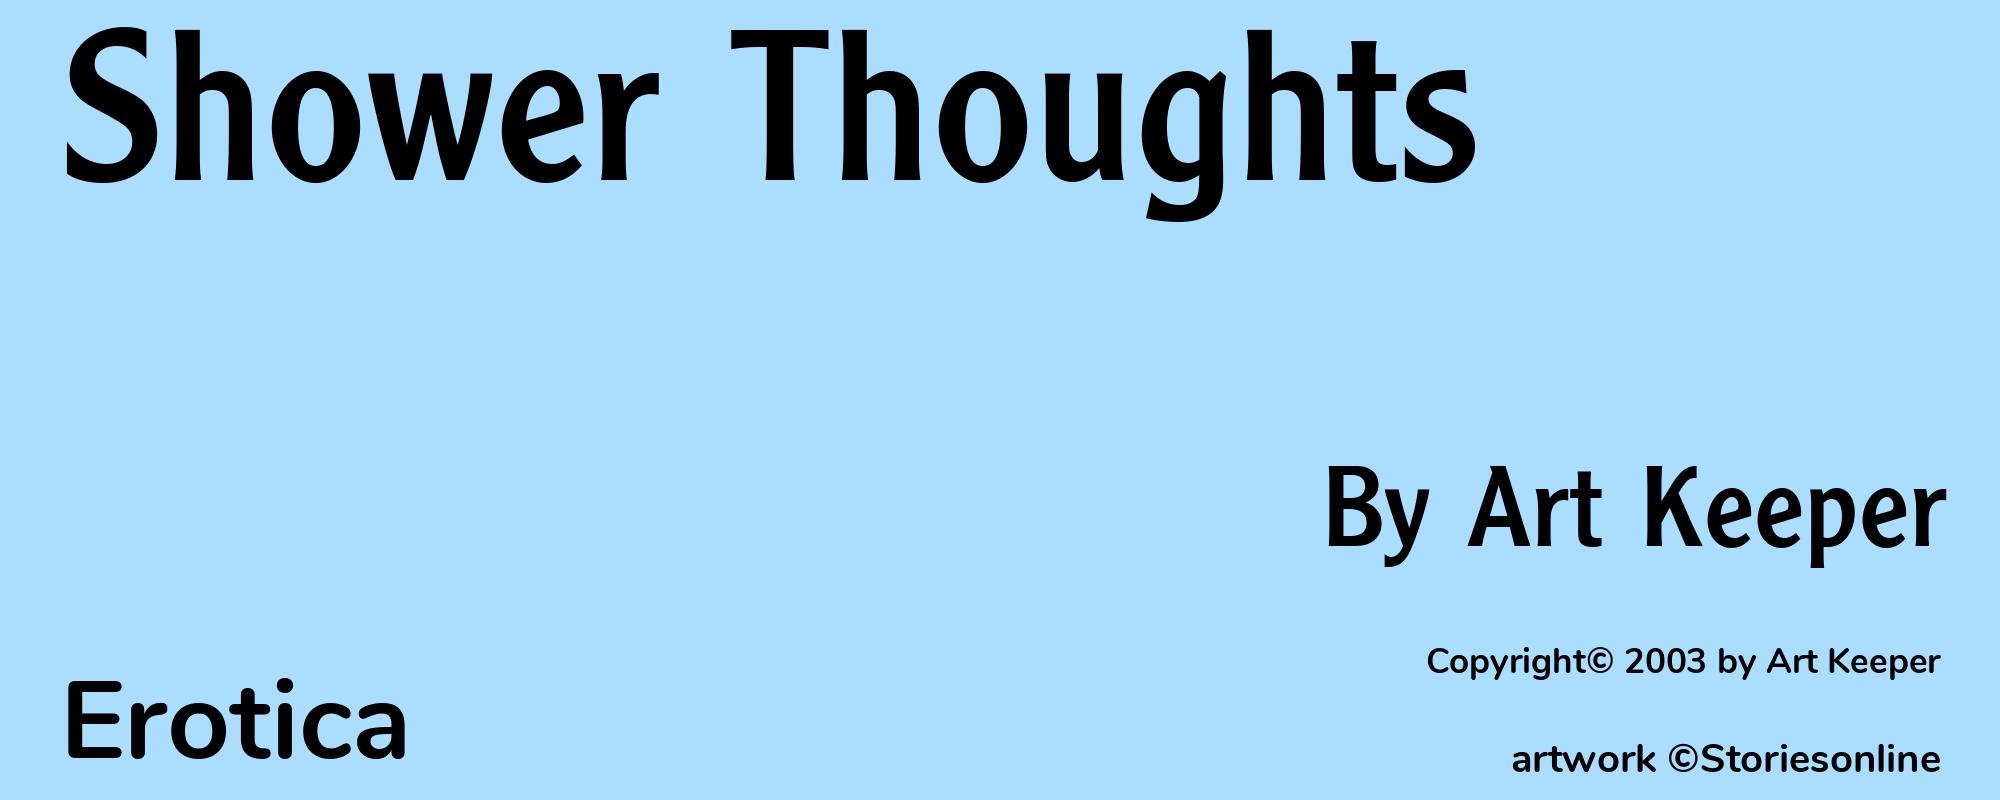 Shower Thoughts - Cover